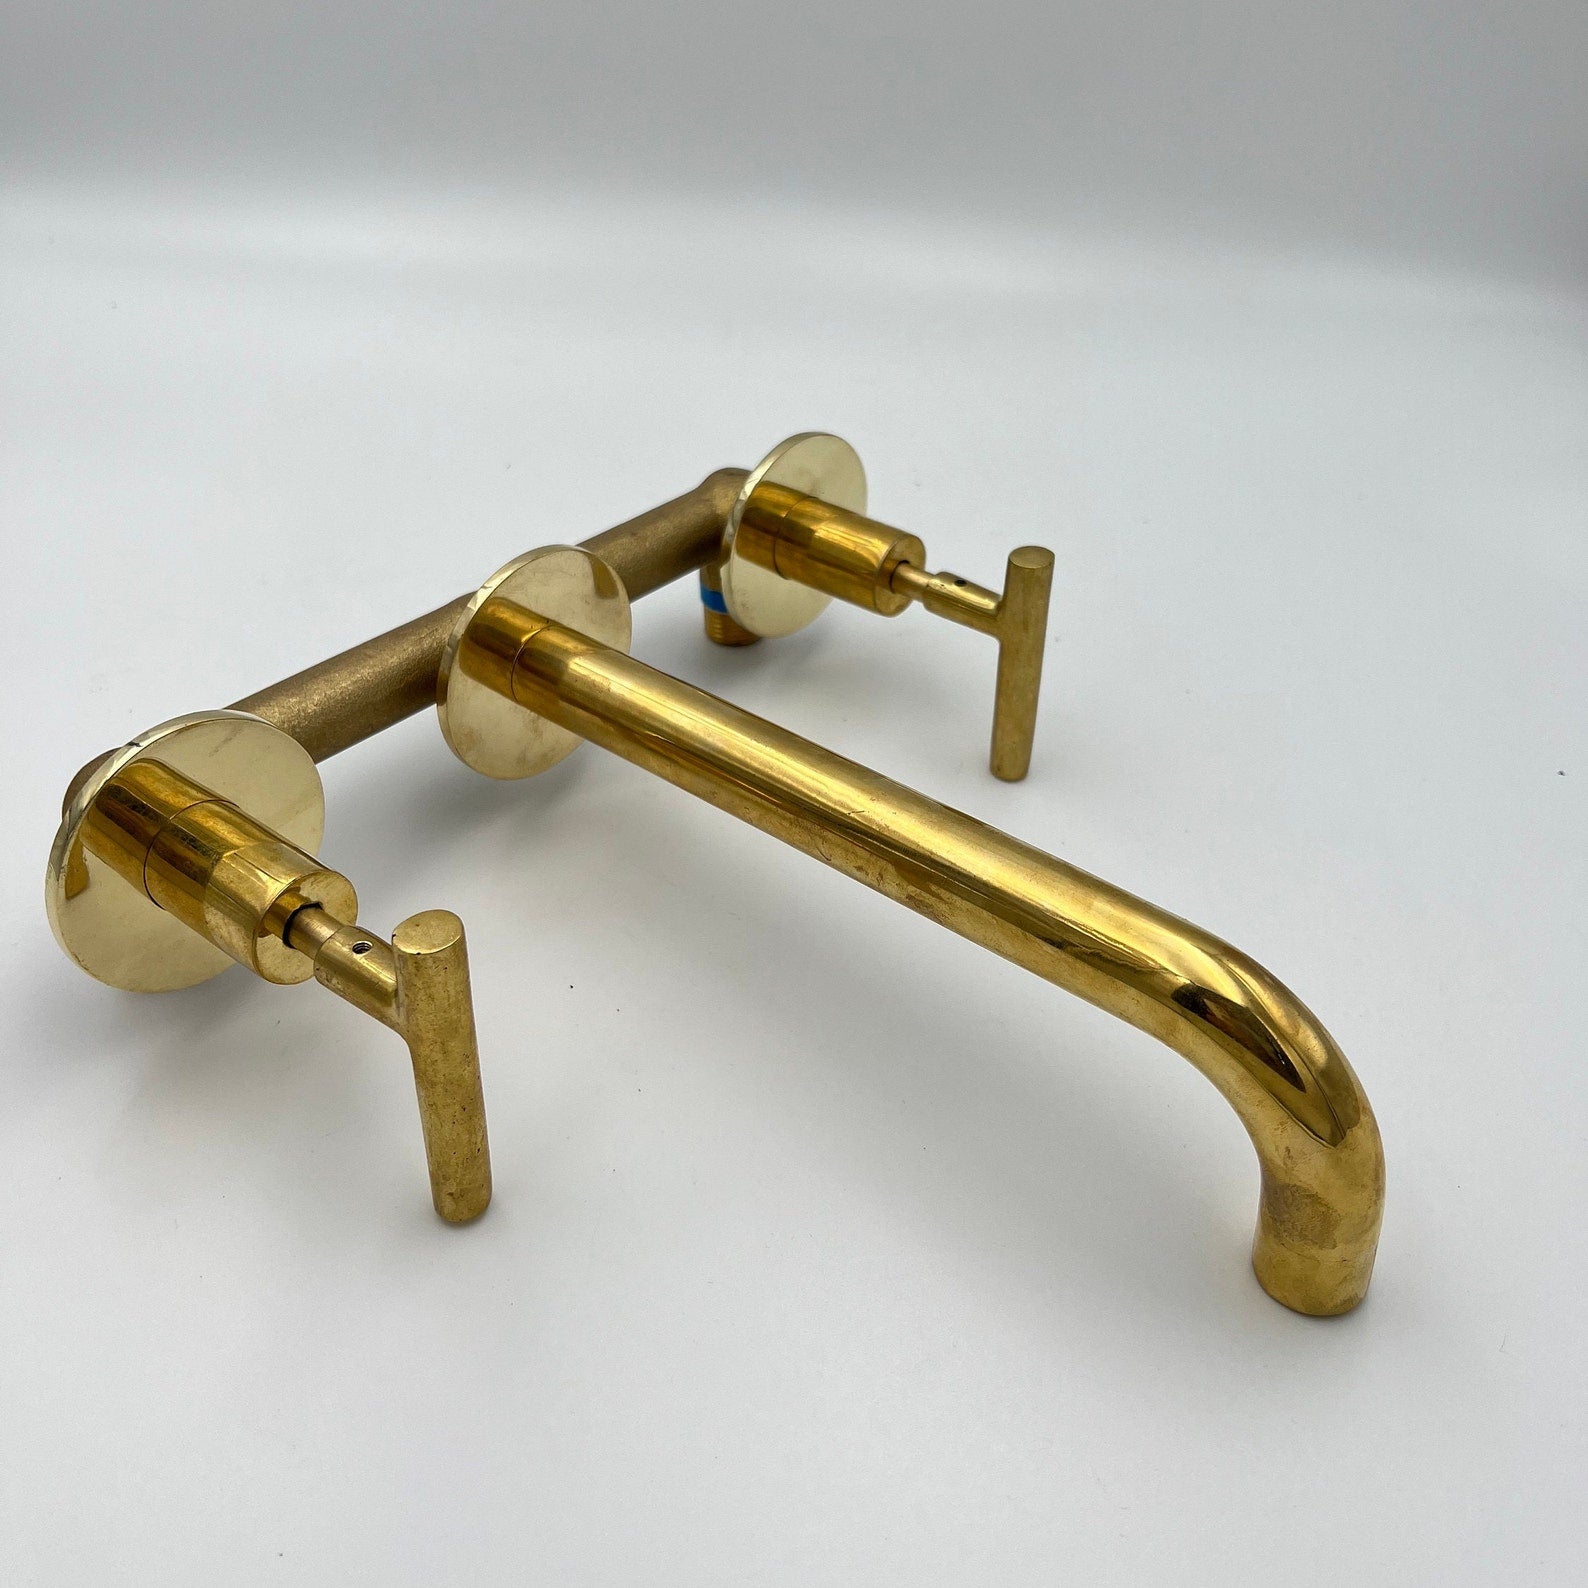 Unlacquered Brass Bathroom Faucet With Lever Handles